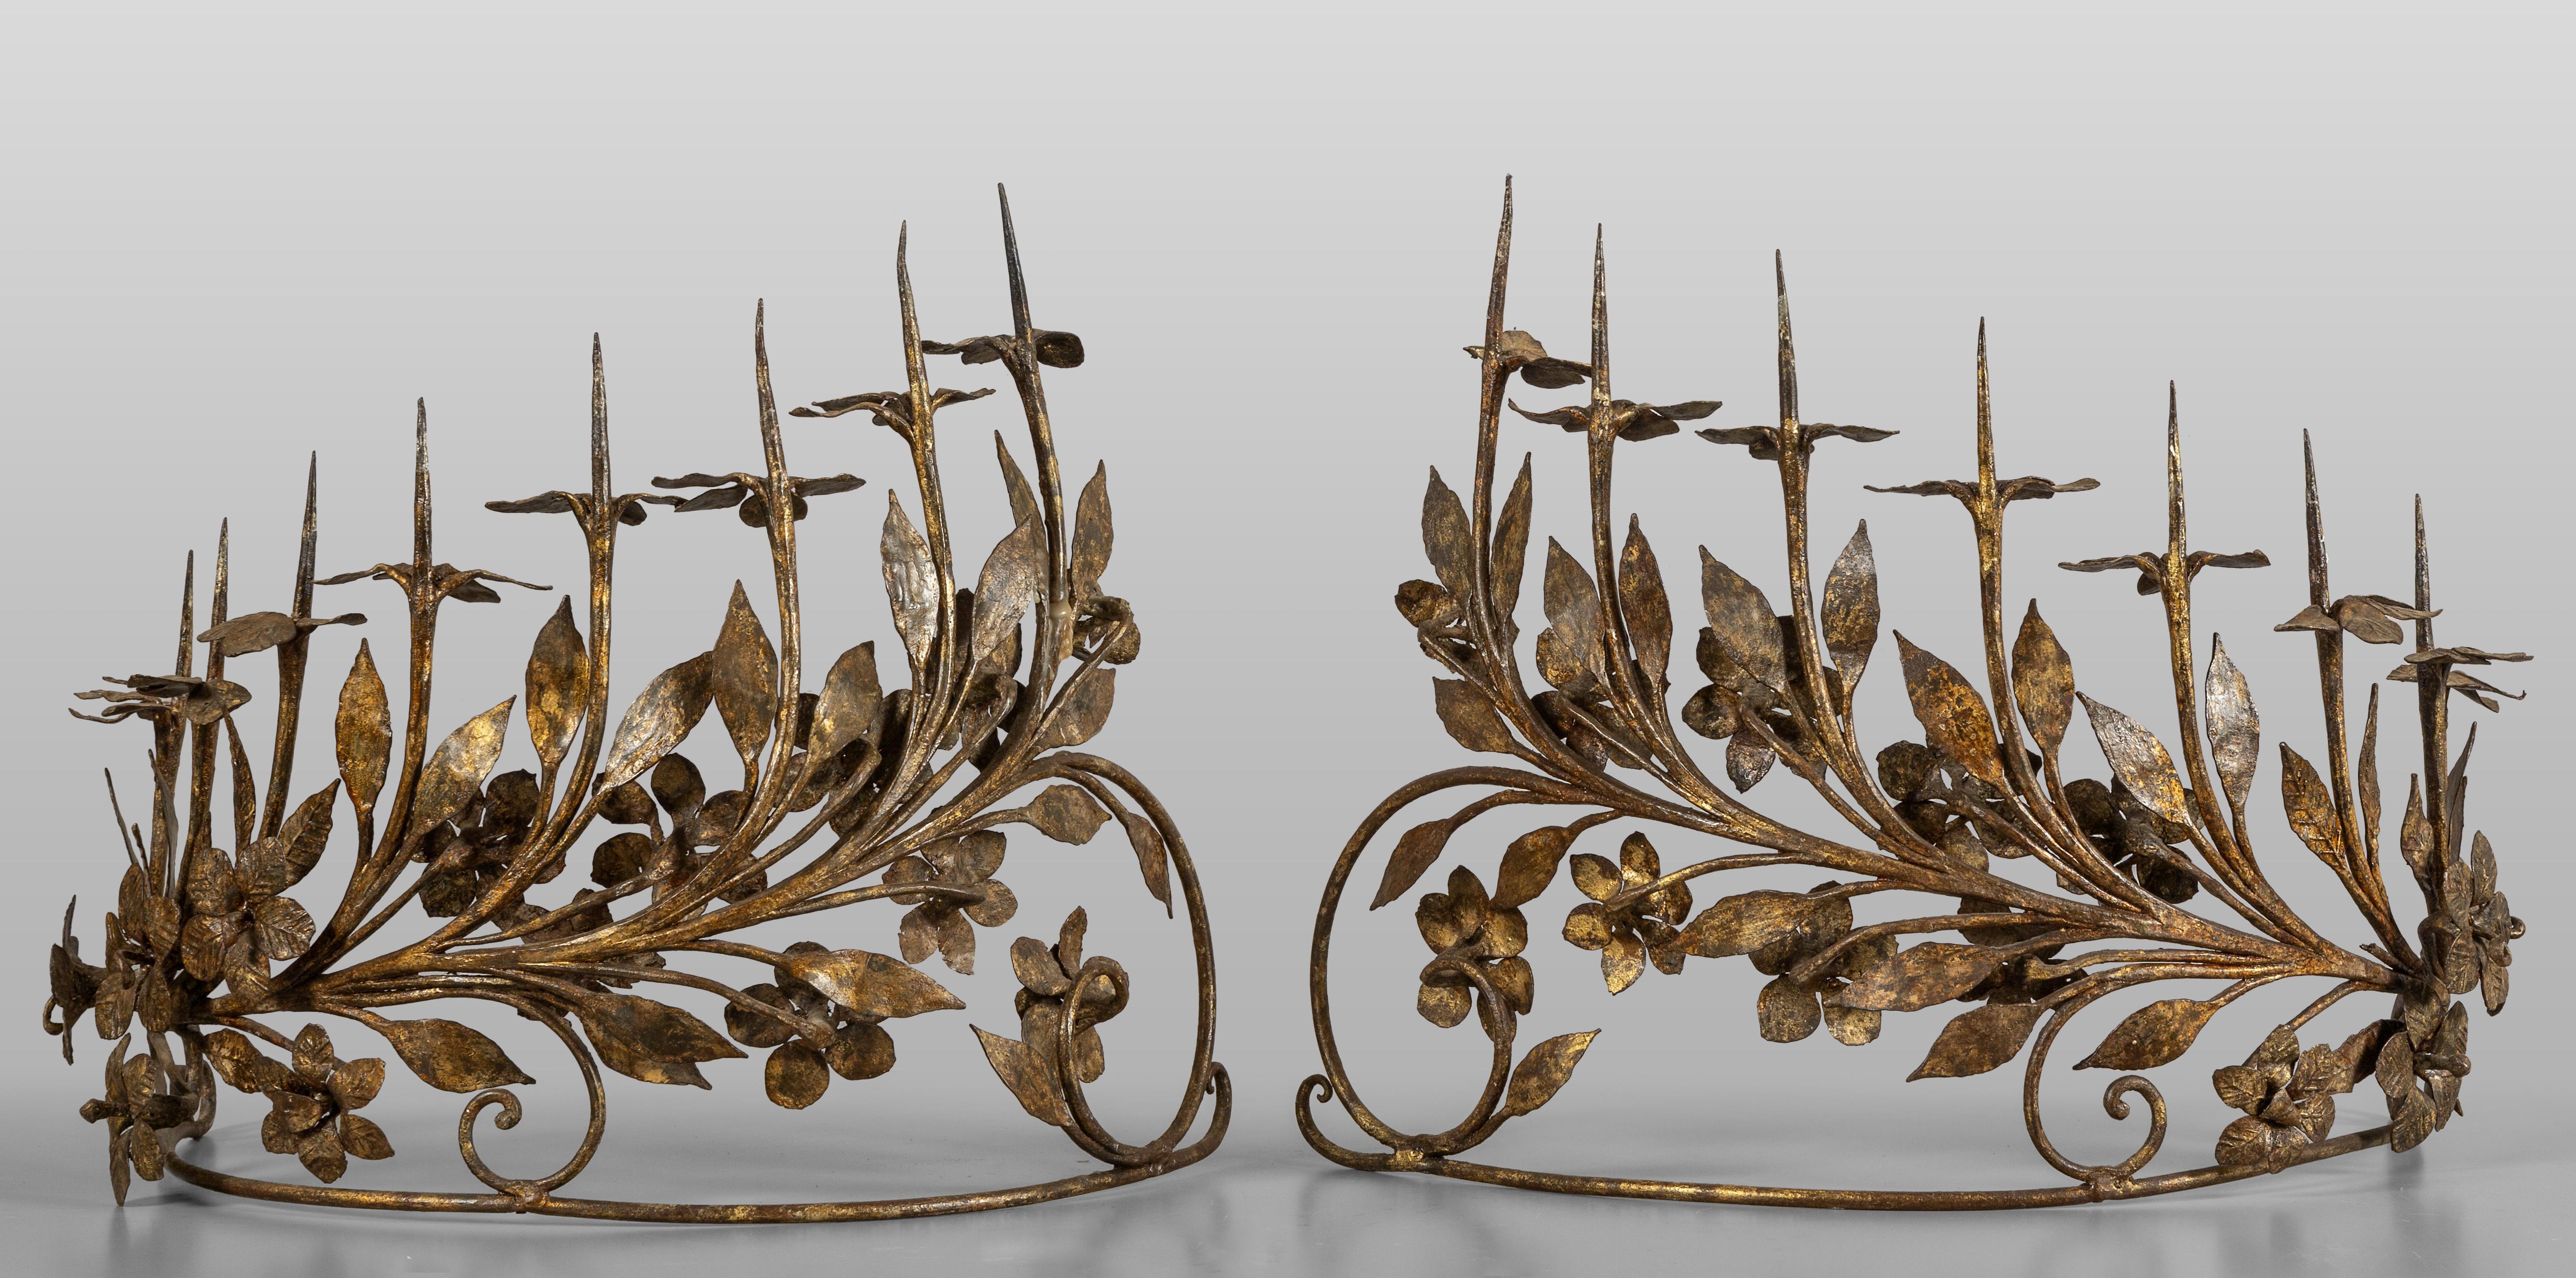 Pair of eight-light antique vintage Italian candelabrum in wrought gilded iron

Anonymous
Probably early 20th century; Italy
Iron

A distinctive pair of curved and crown-like beautiful eight-light vintage Italian gilt-iron candelabrum with integral